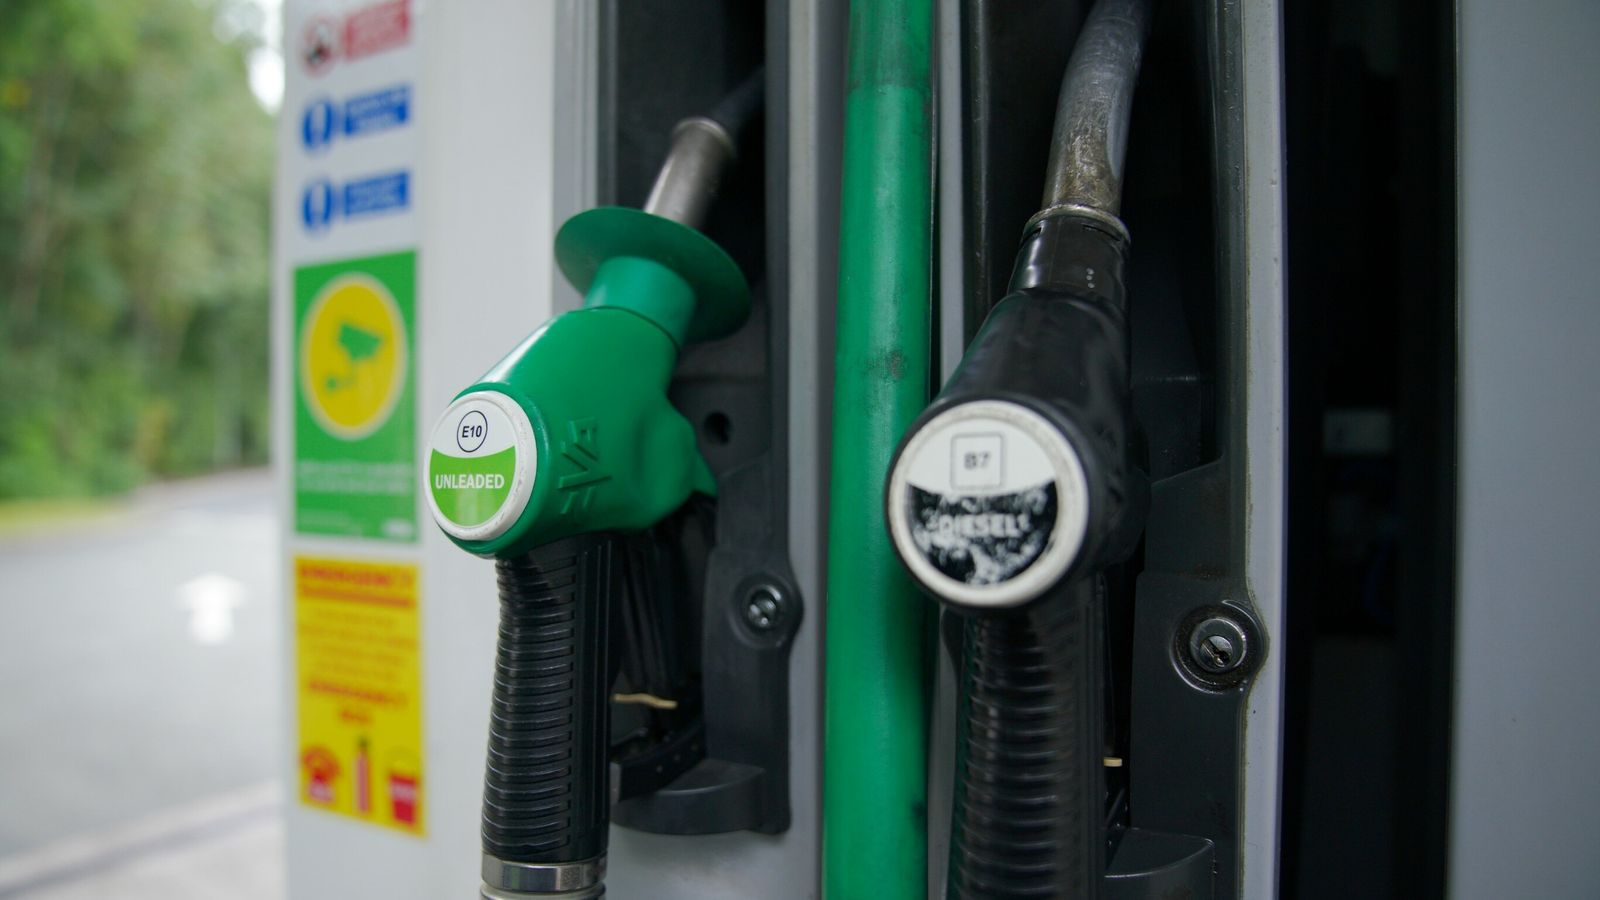 Drivers paid higher fuel prices after supermarkets increased margins - watchdog